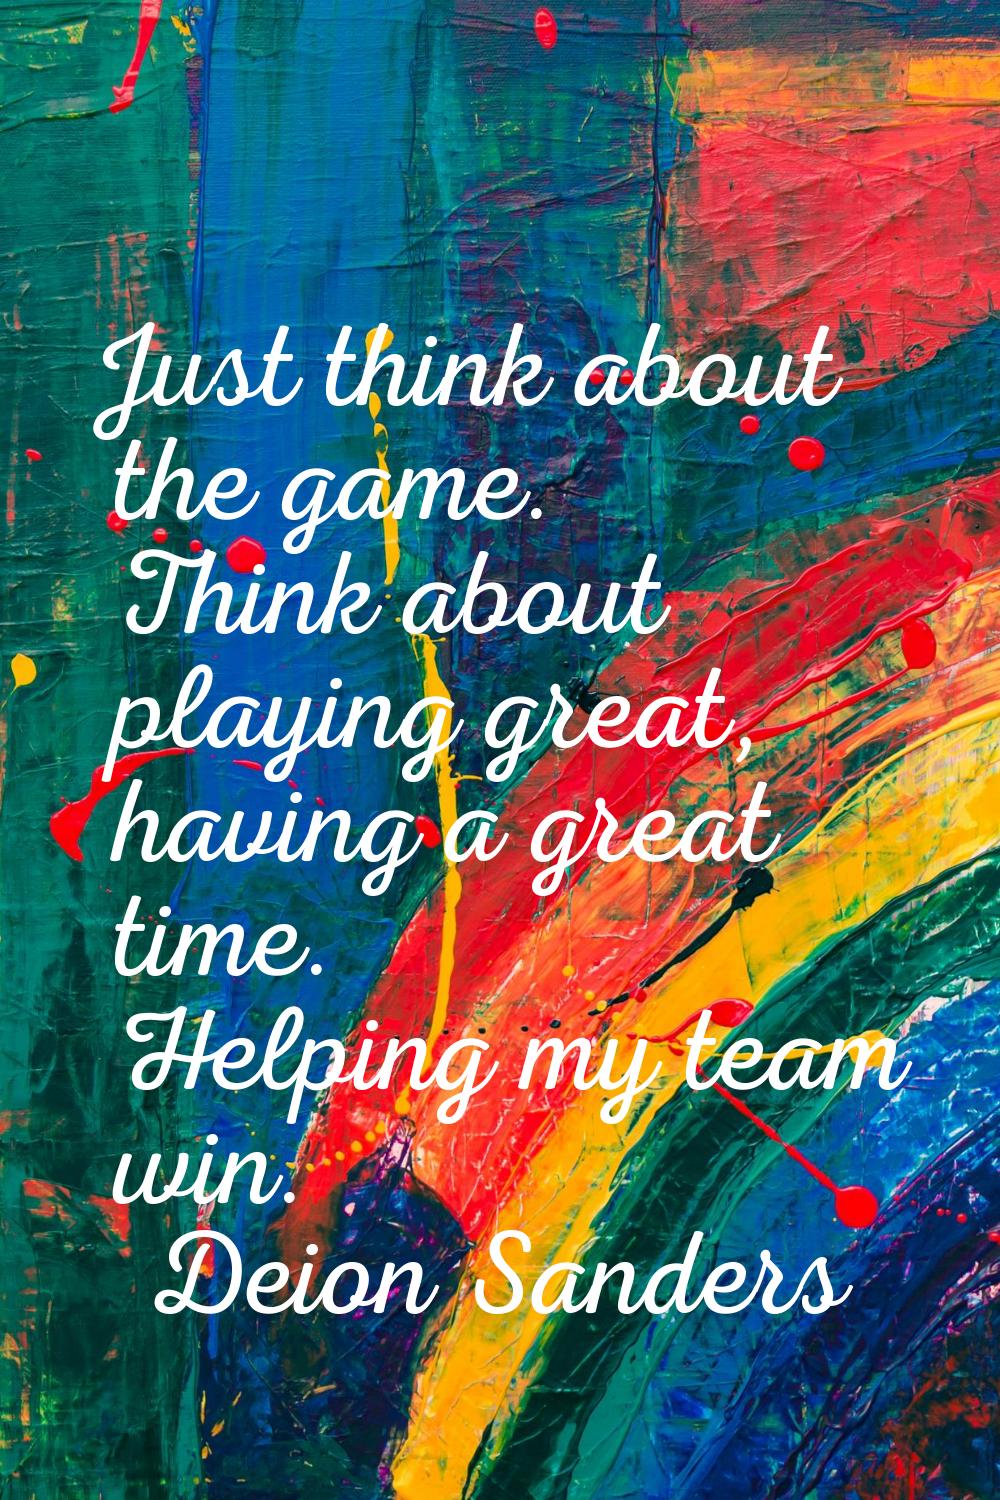 Just think about the game. Think about playing great, having a great time. Helping my team win.